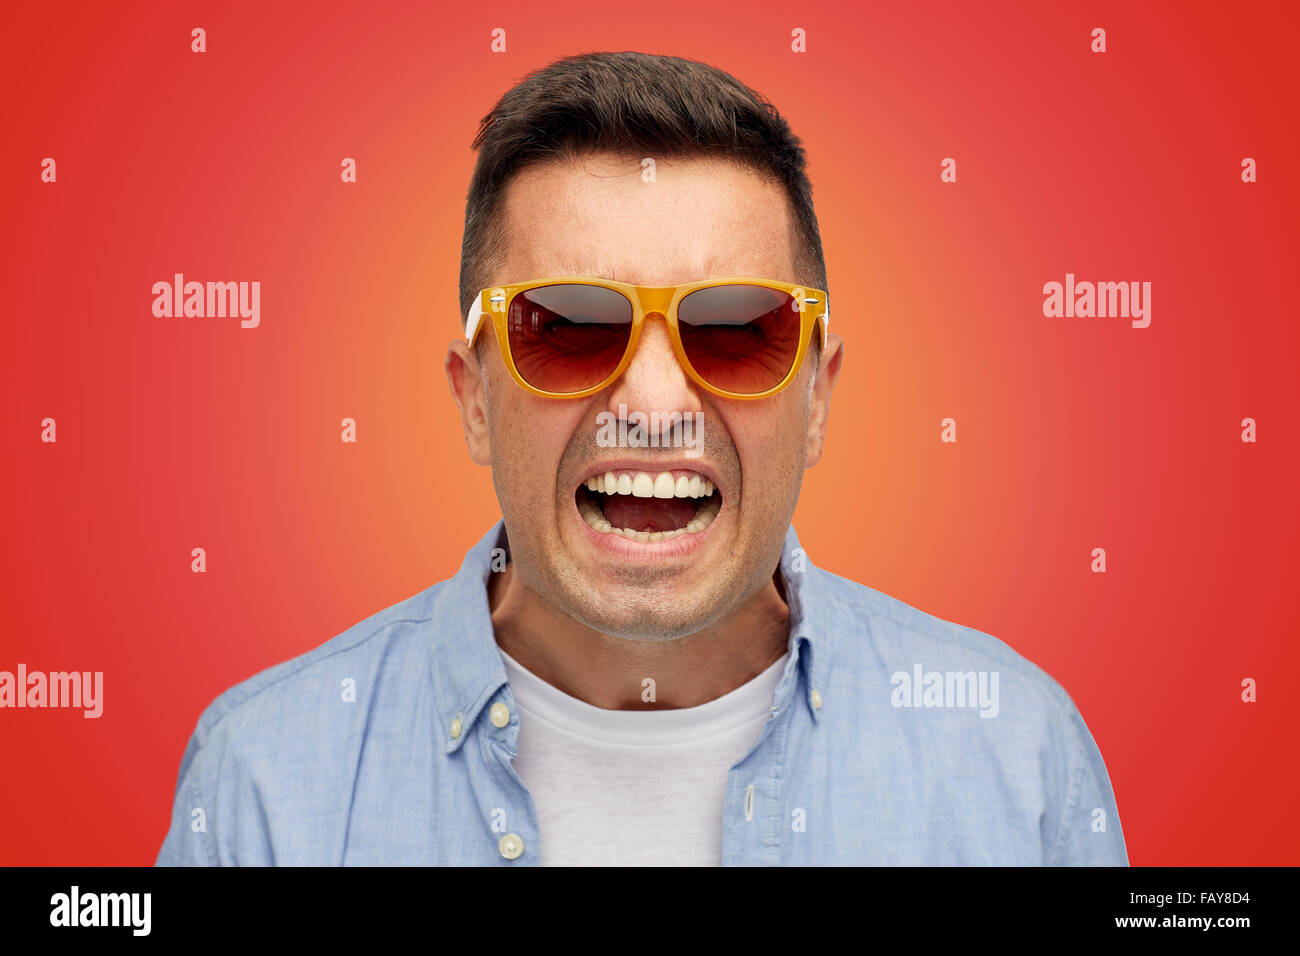 face of angry man in shirt and sunglasses over red Stock Photo